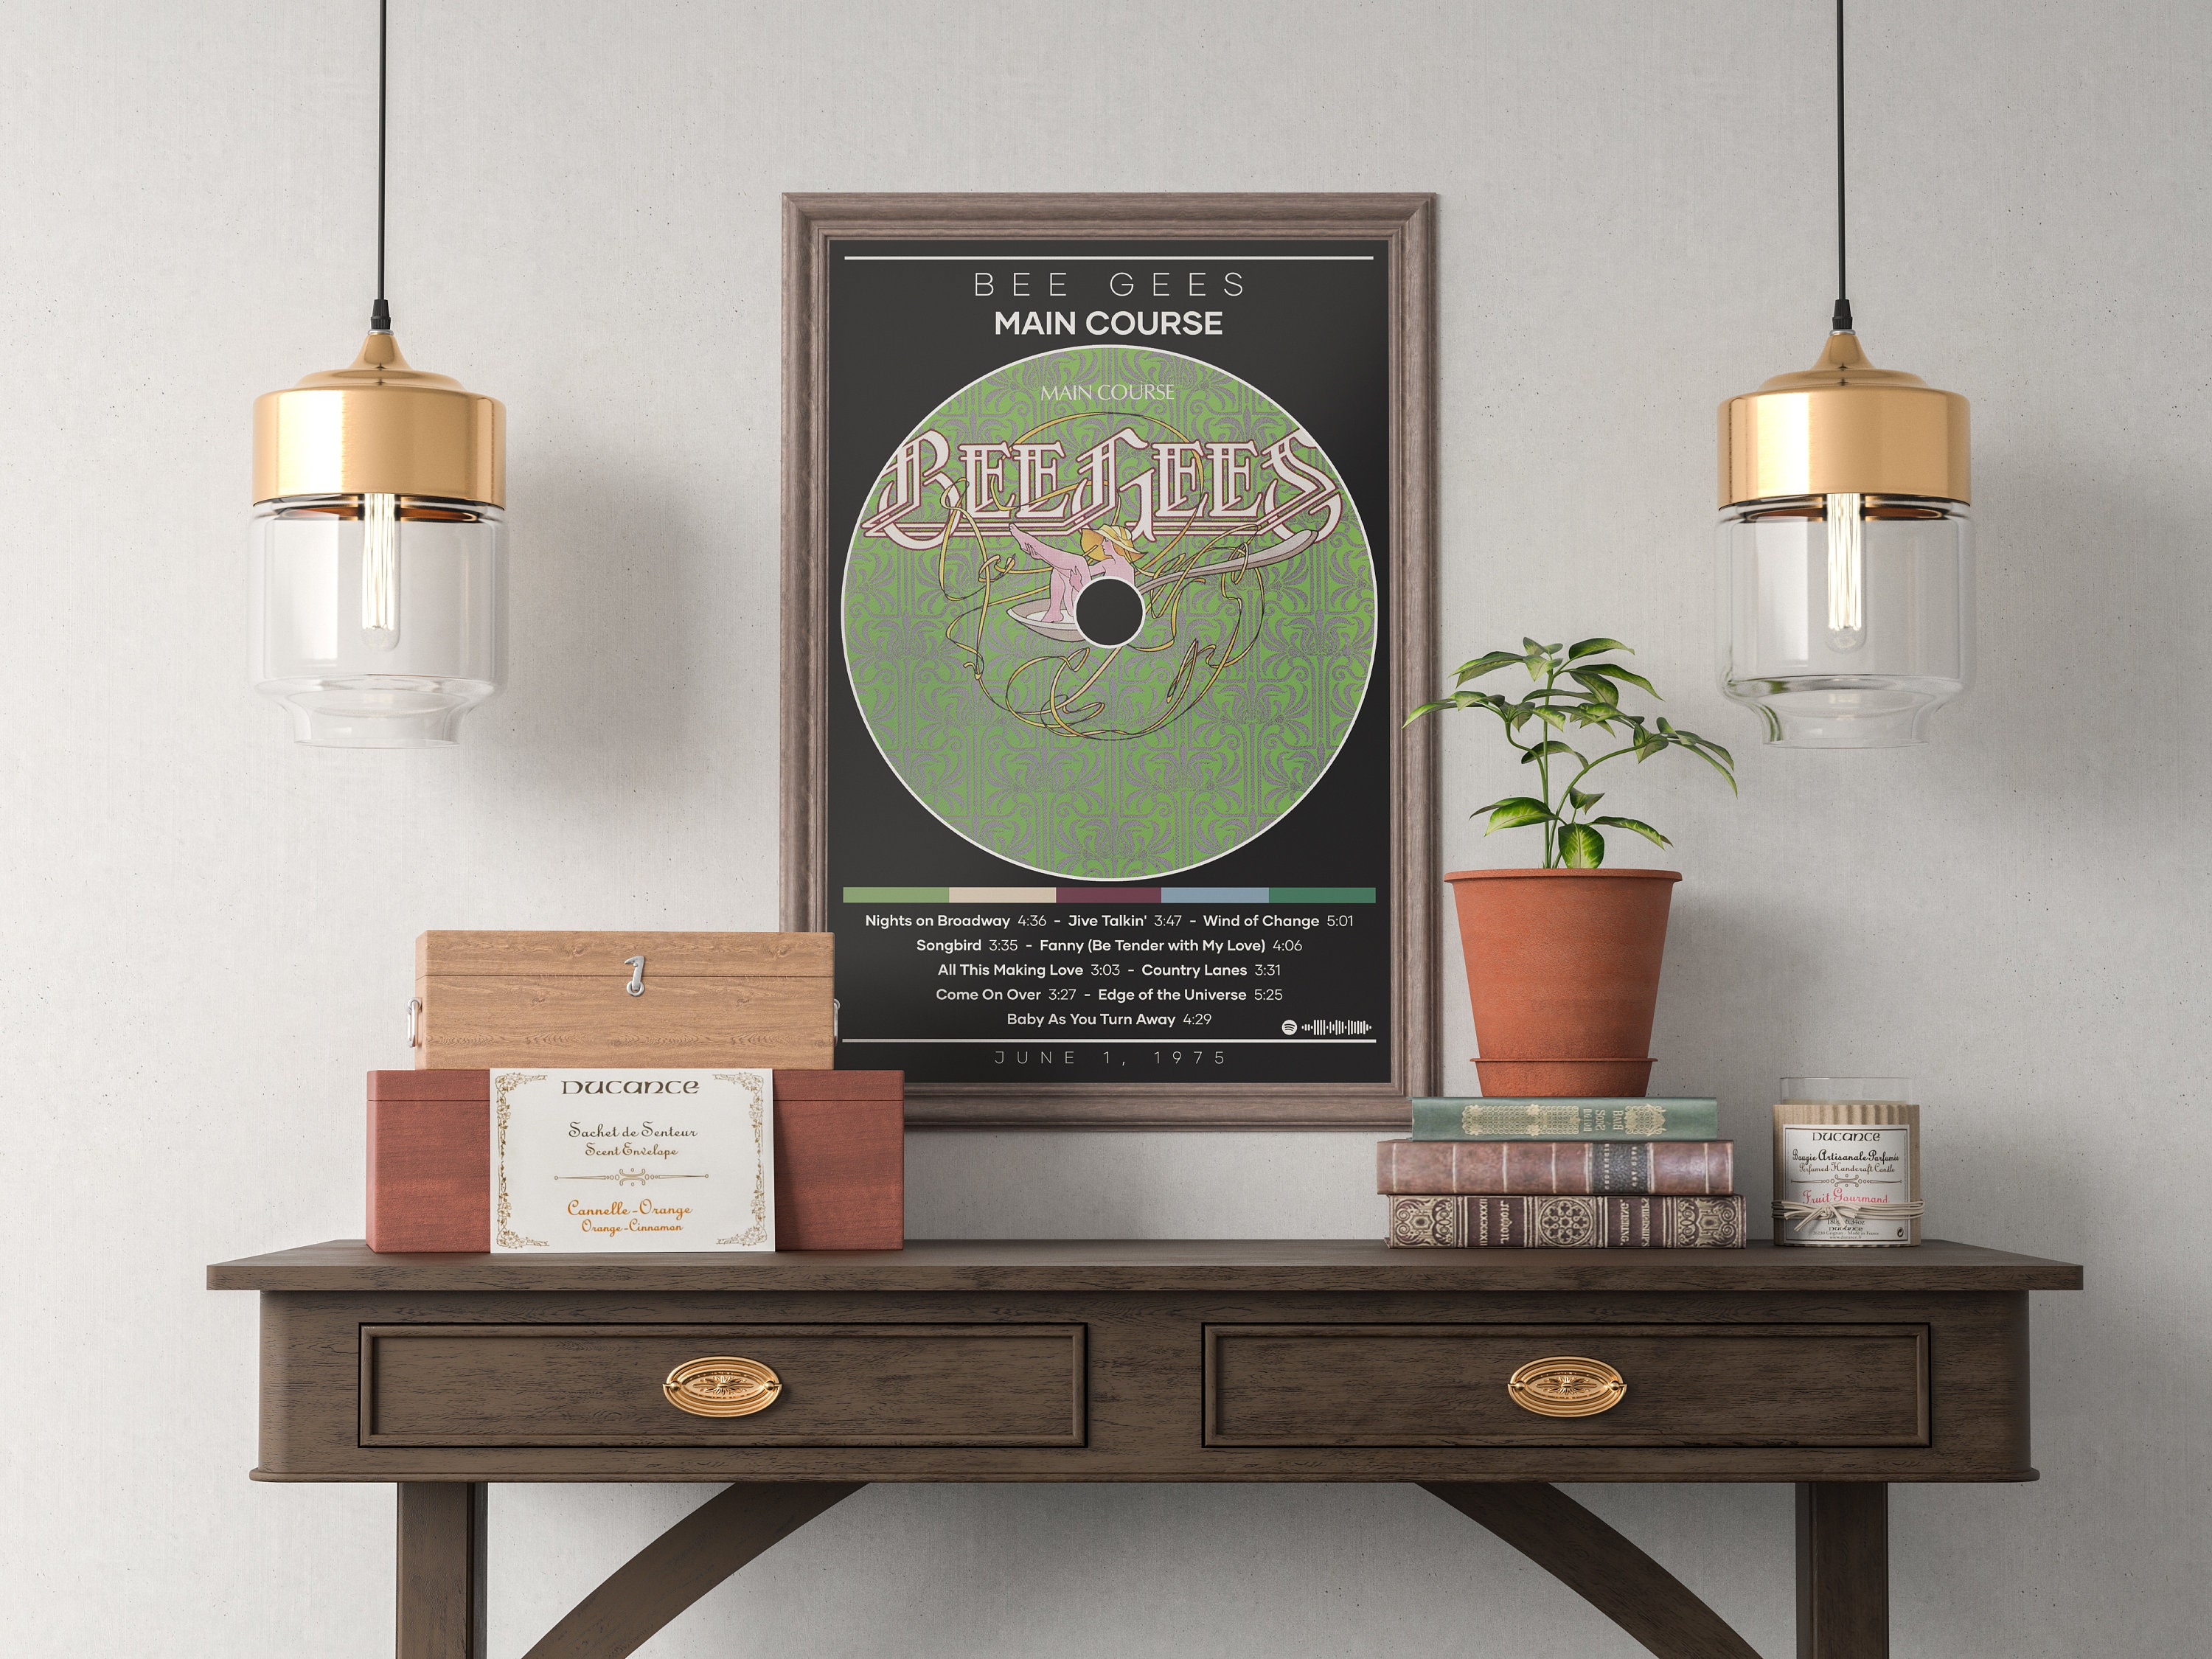 Bee Gees Poster Print | Main Course Poster | Album Cover Poster